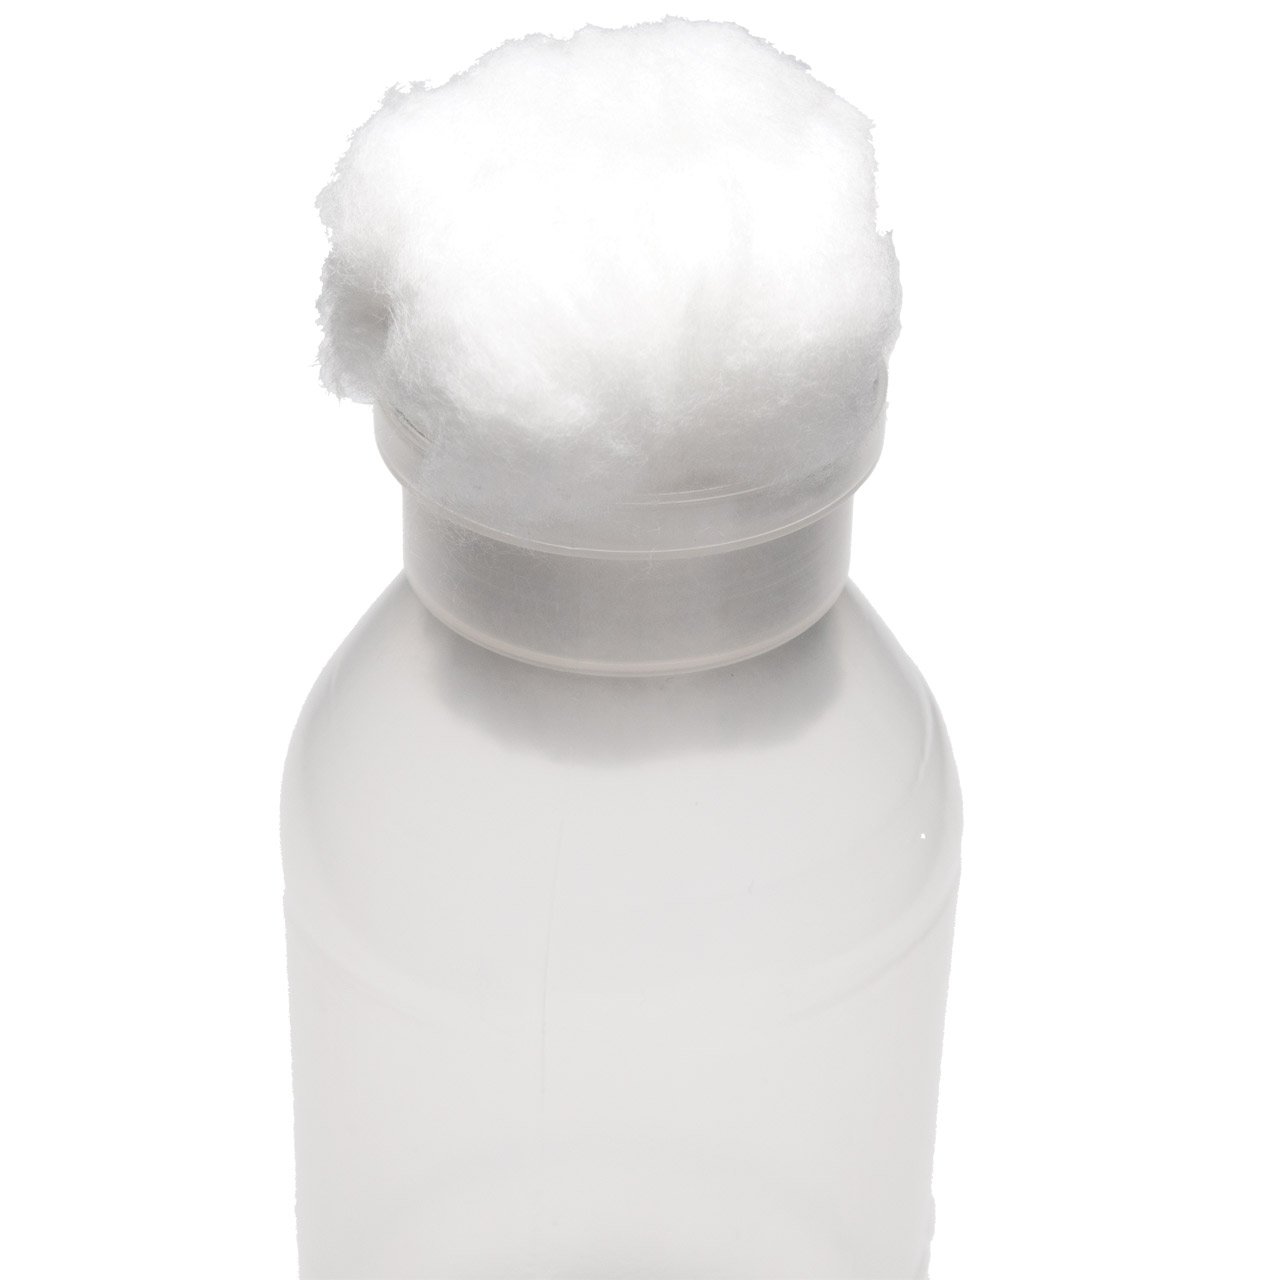 Cotton ball extra- large, fits stock bottle (2000)